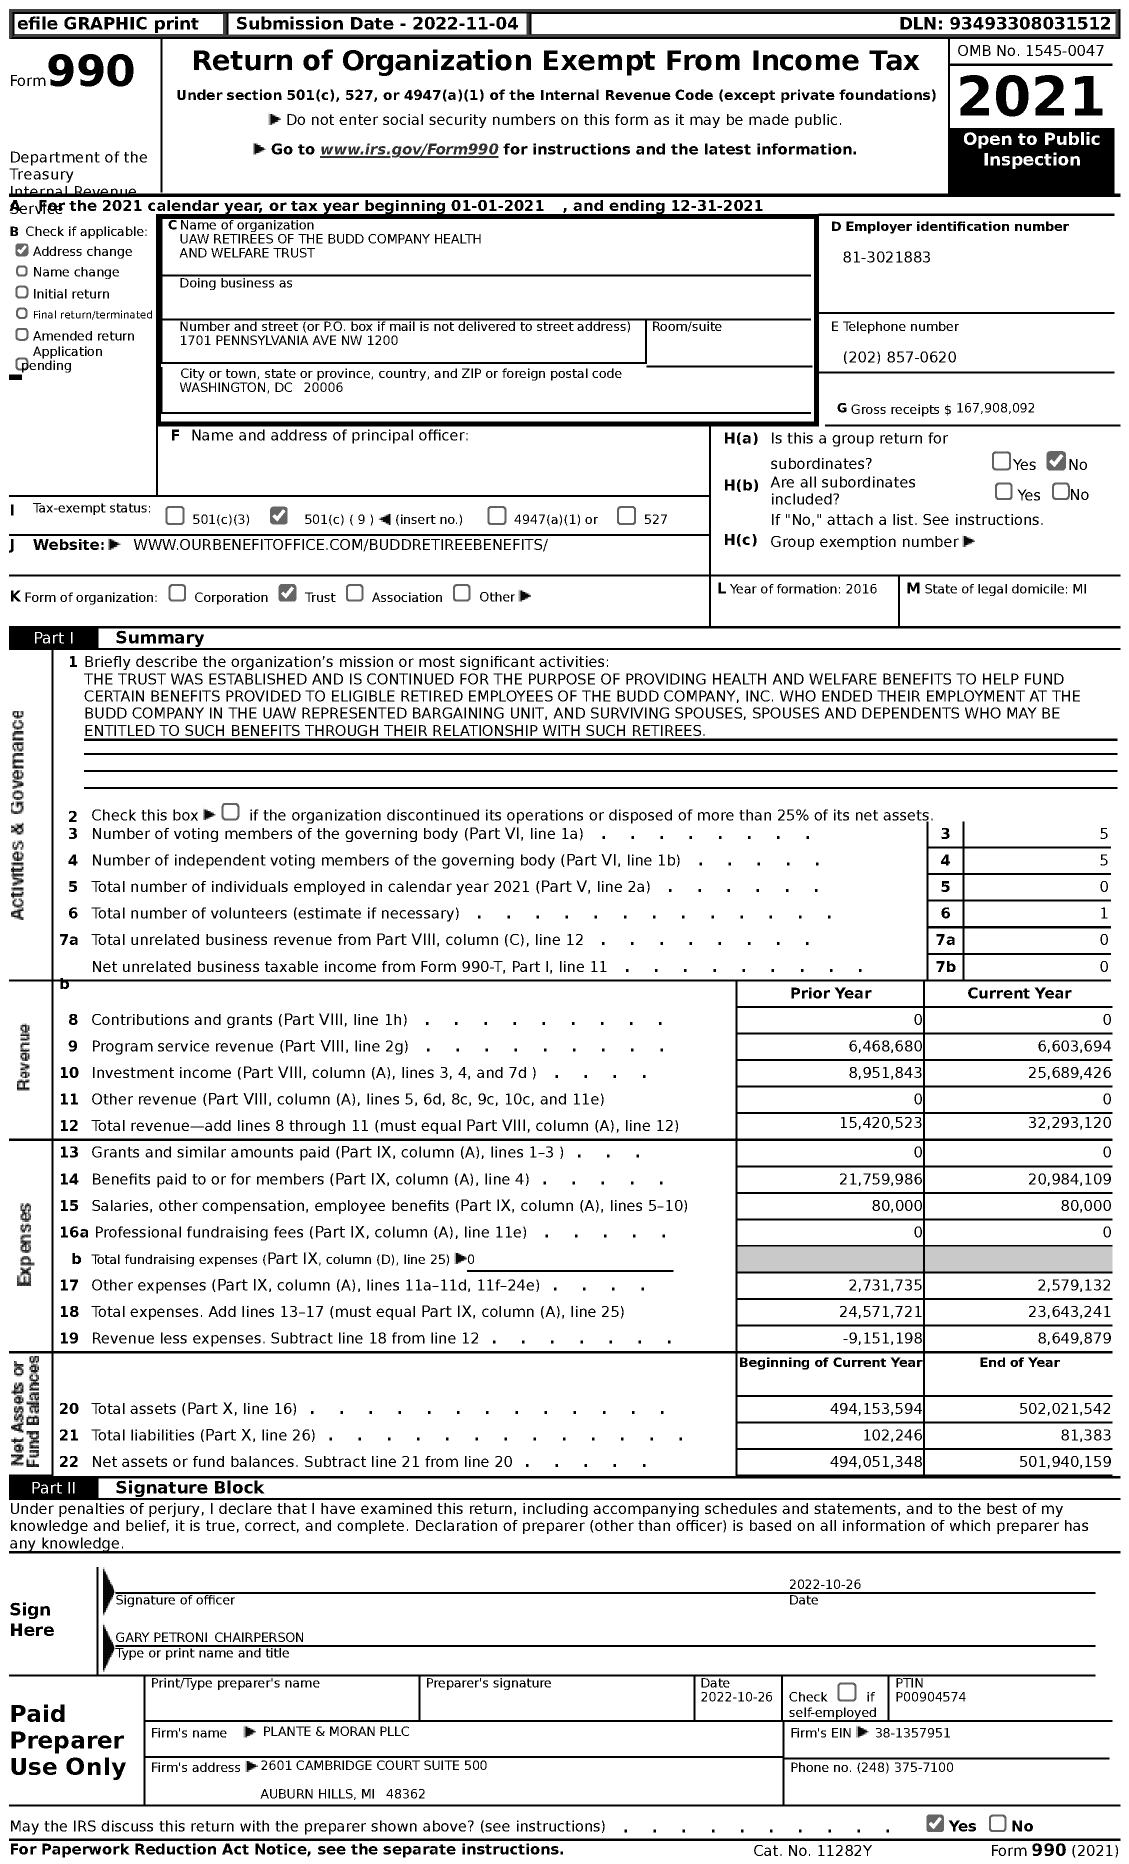 Image of first page of 2021 Form 990 for Uaw Retirees of the Budd Company Health and Welfare Trust